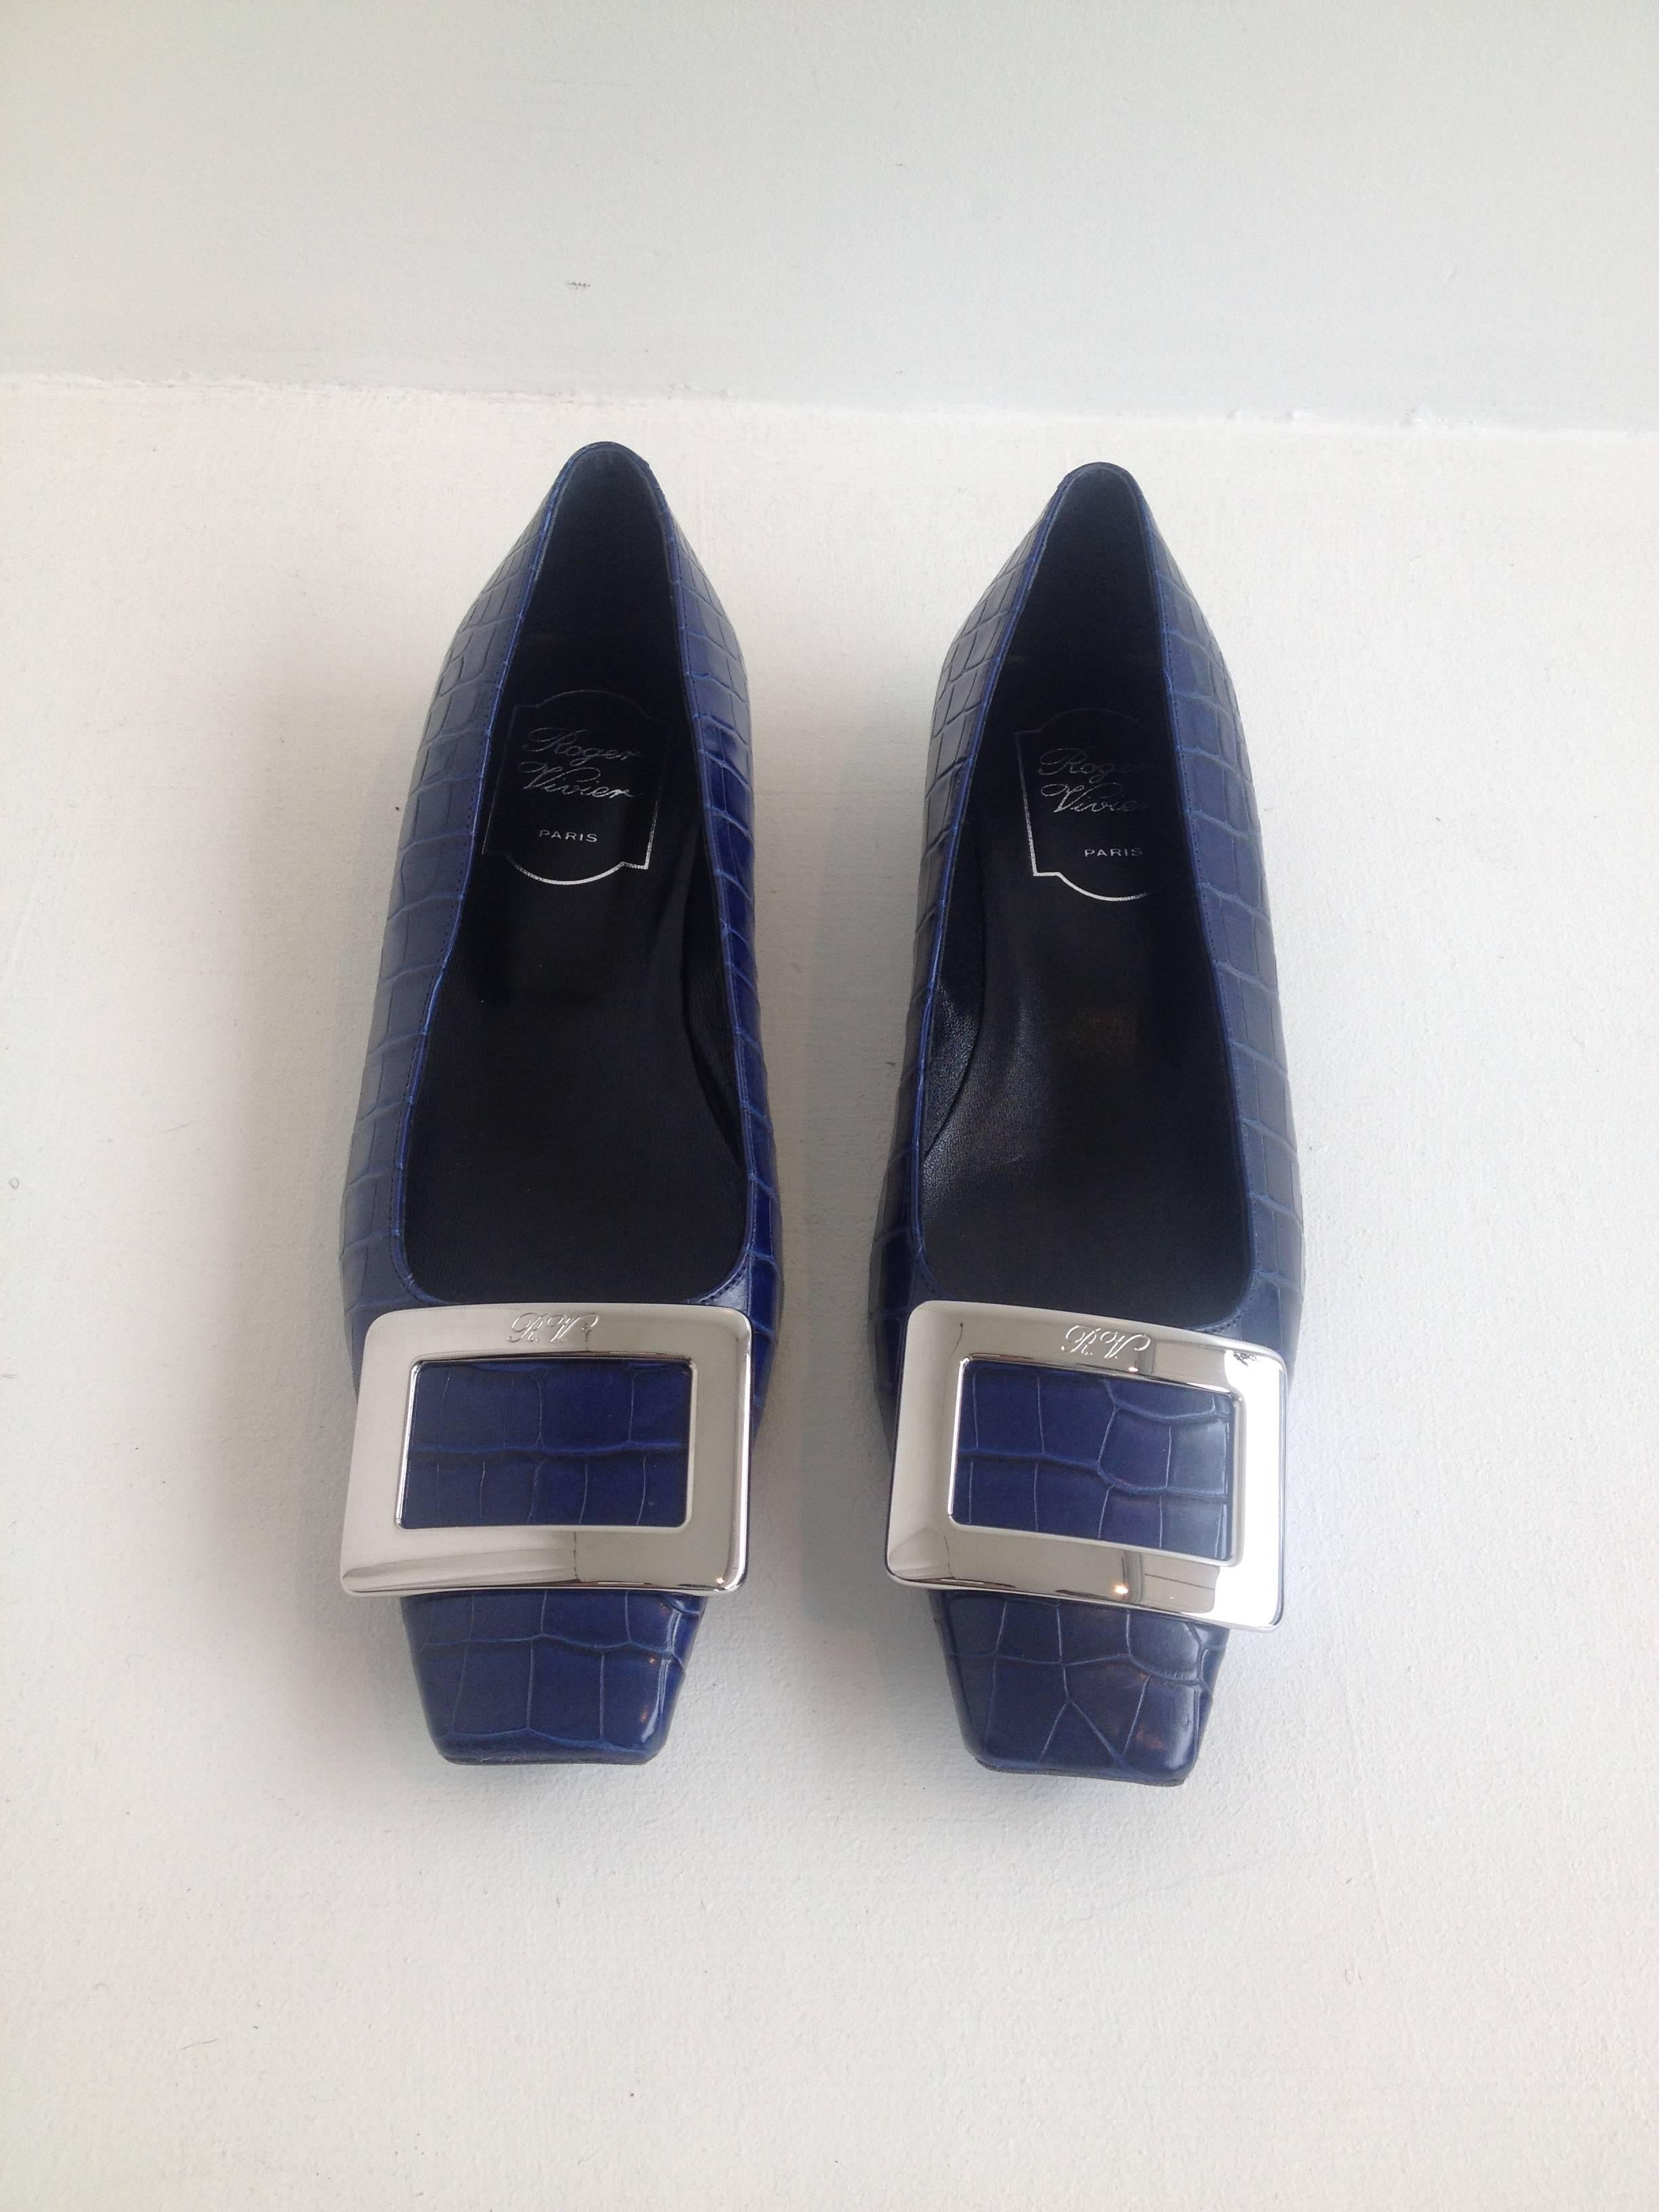 We love the way that even the most classic Roger Vivier flats always feel so current. These are timeless but simultaneously  edgy - the crocodile look is luxurious, while the eye-catching bright blue feels fresh and young. The square toe is totally